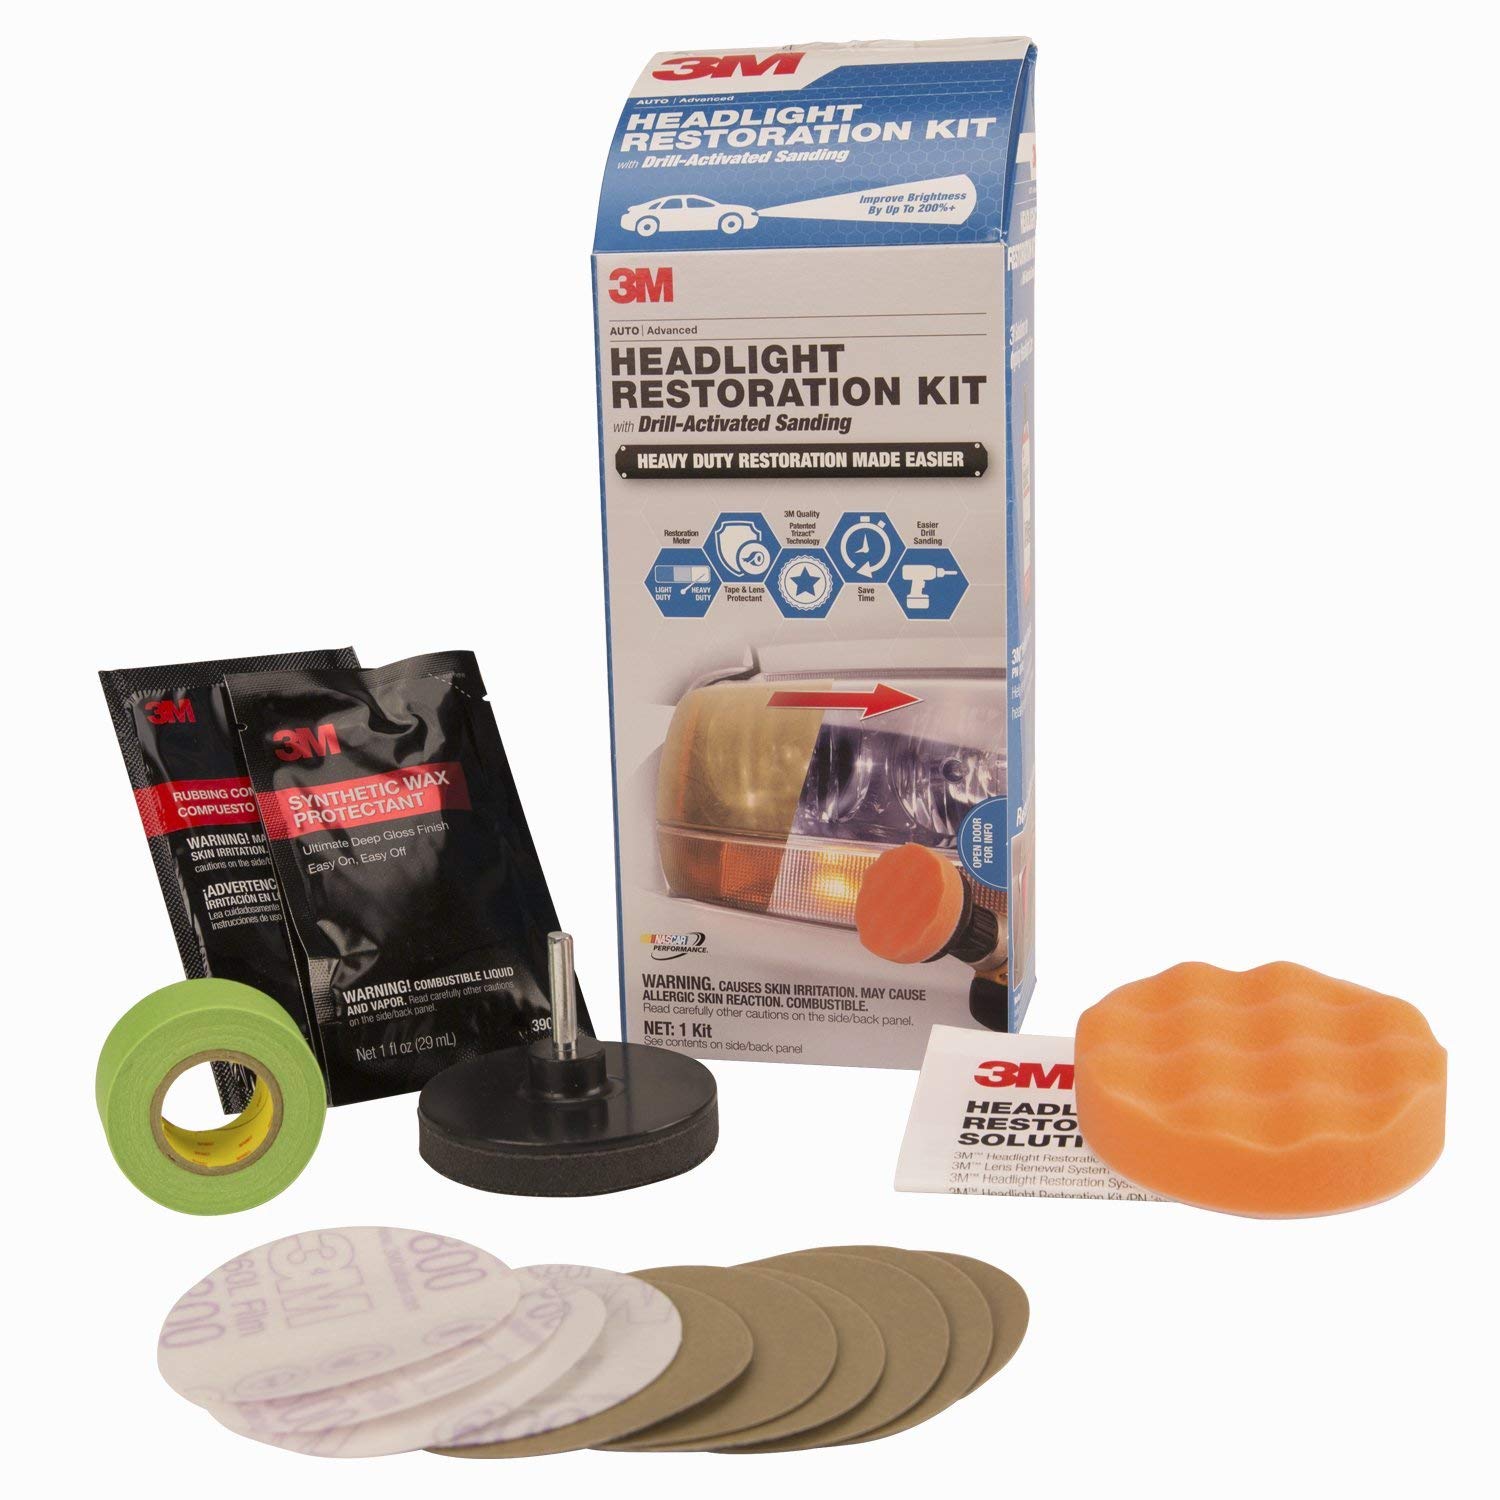 3M Headlight Restoration Kit Review: Save Money And Restore Your Headlights